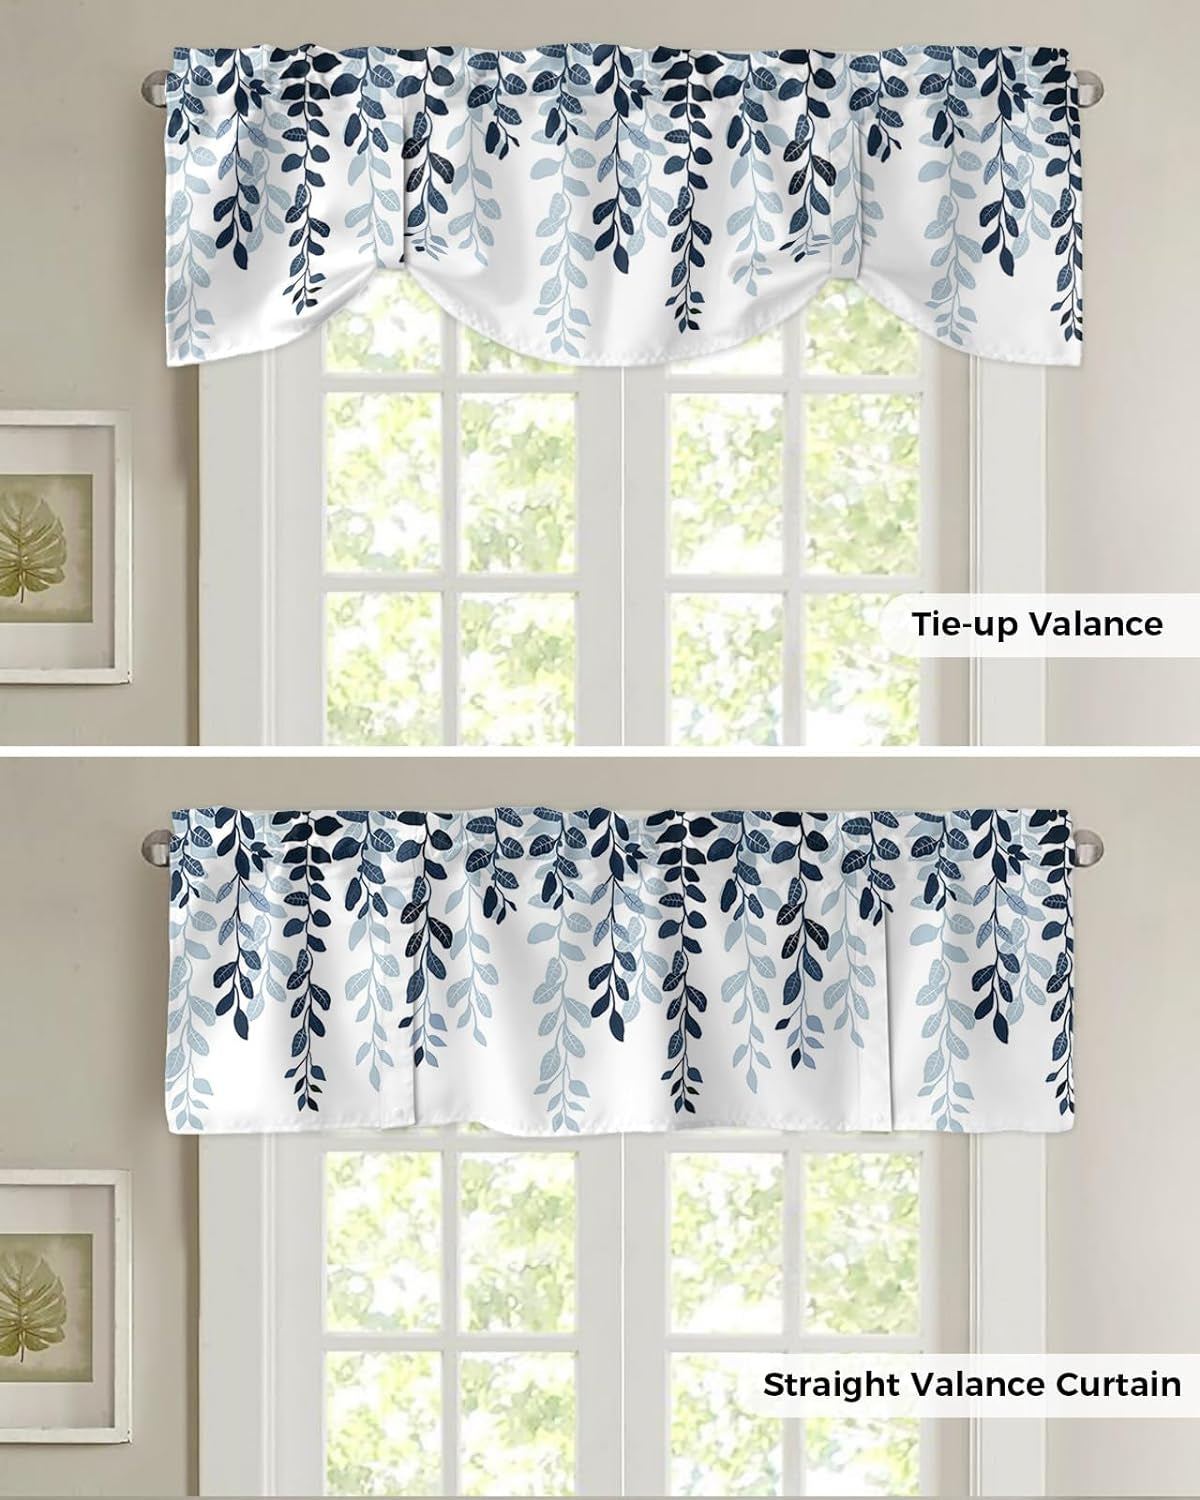 Navy Blue Botanical Tie up Valance Curtains for Windows, Ombre Abstract Art Kitchen Curtains Window Treatments, Pastoral Leaf Short Window Shades Valances for Bedroom Bathroom Cafe 54"X18"